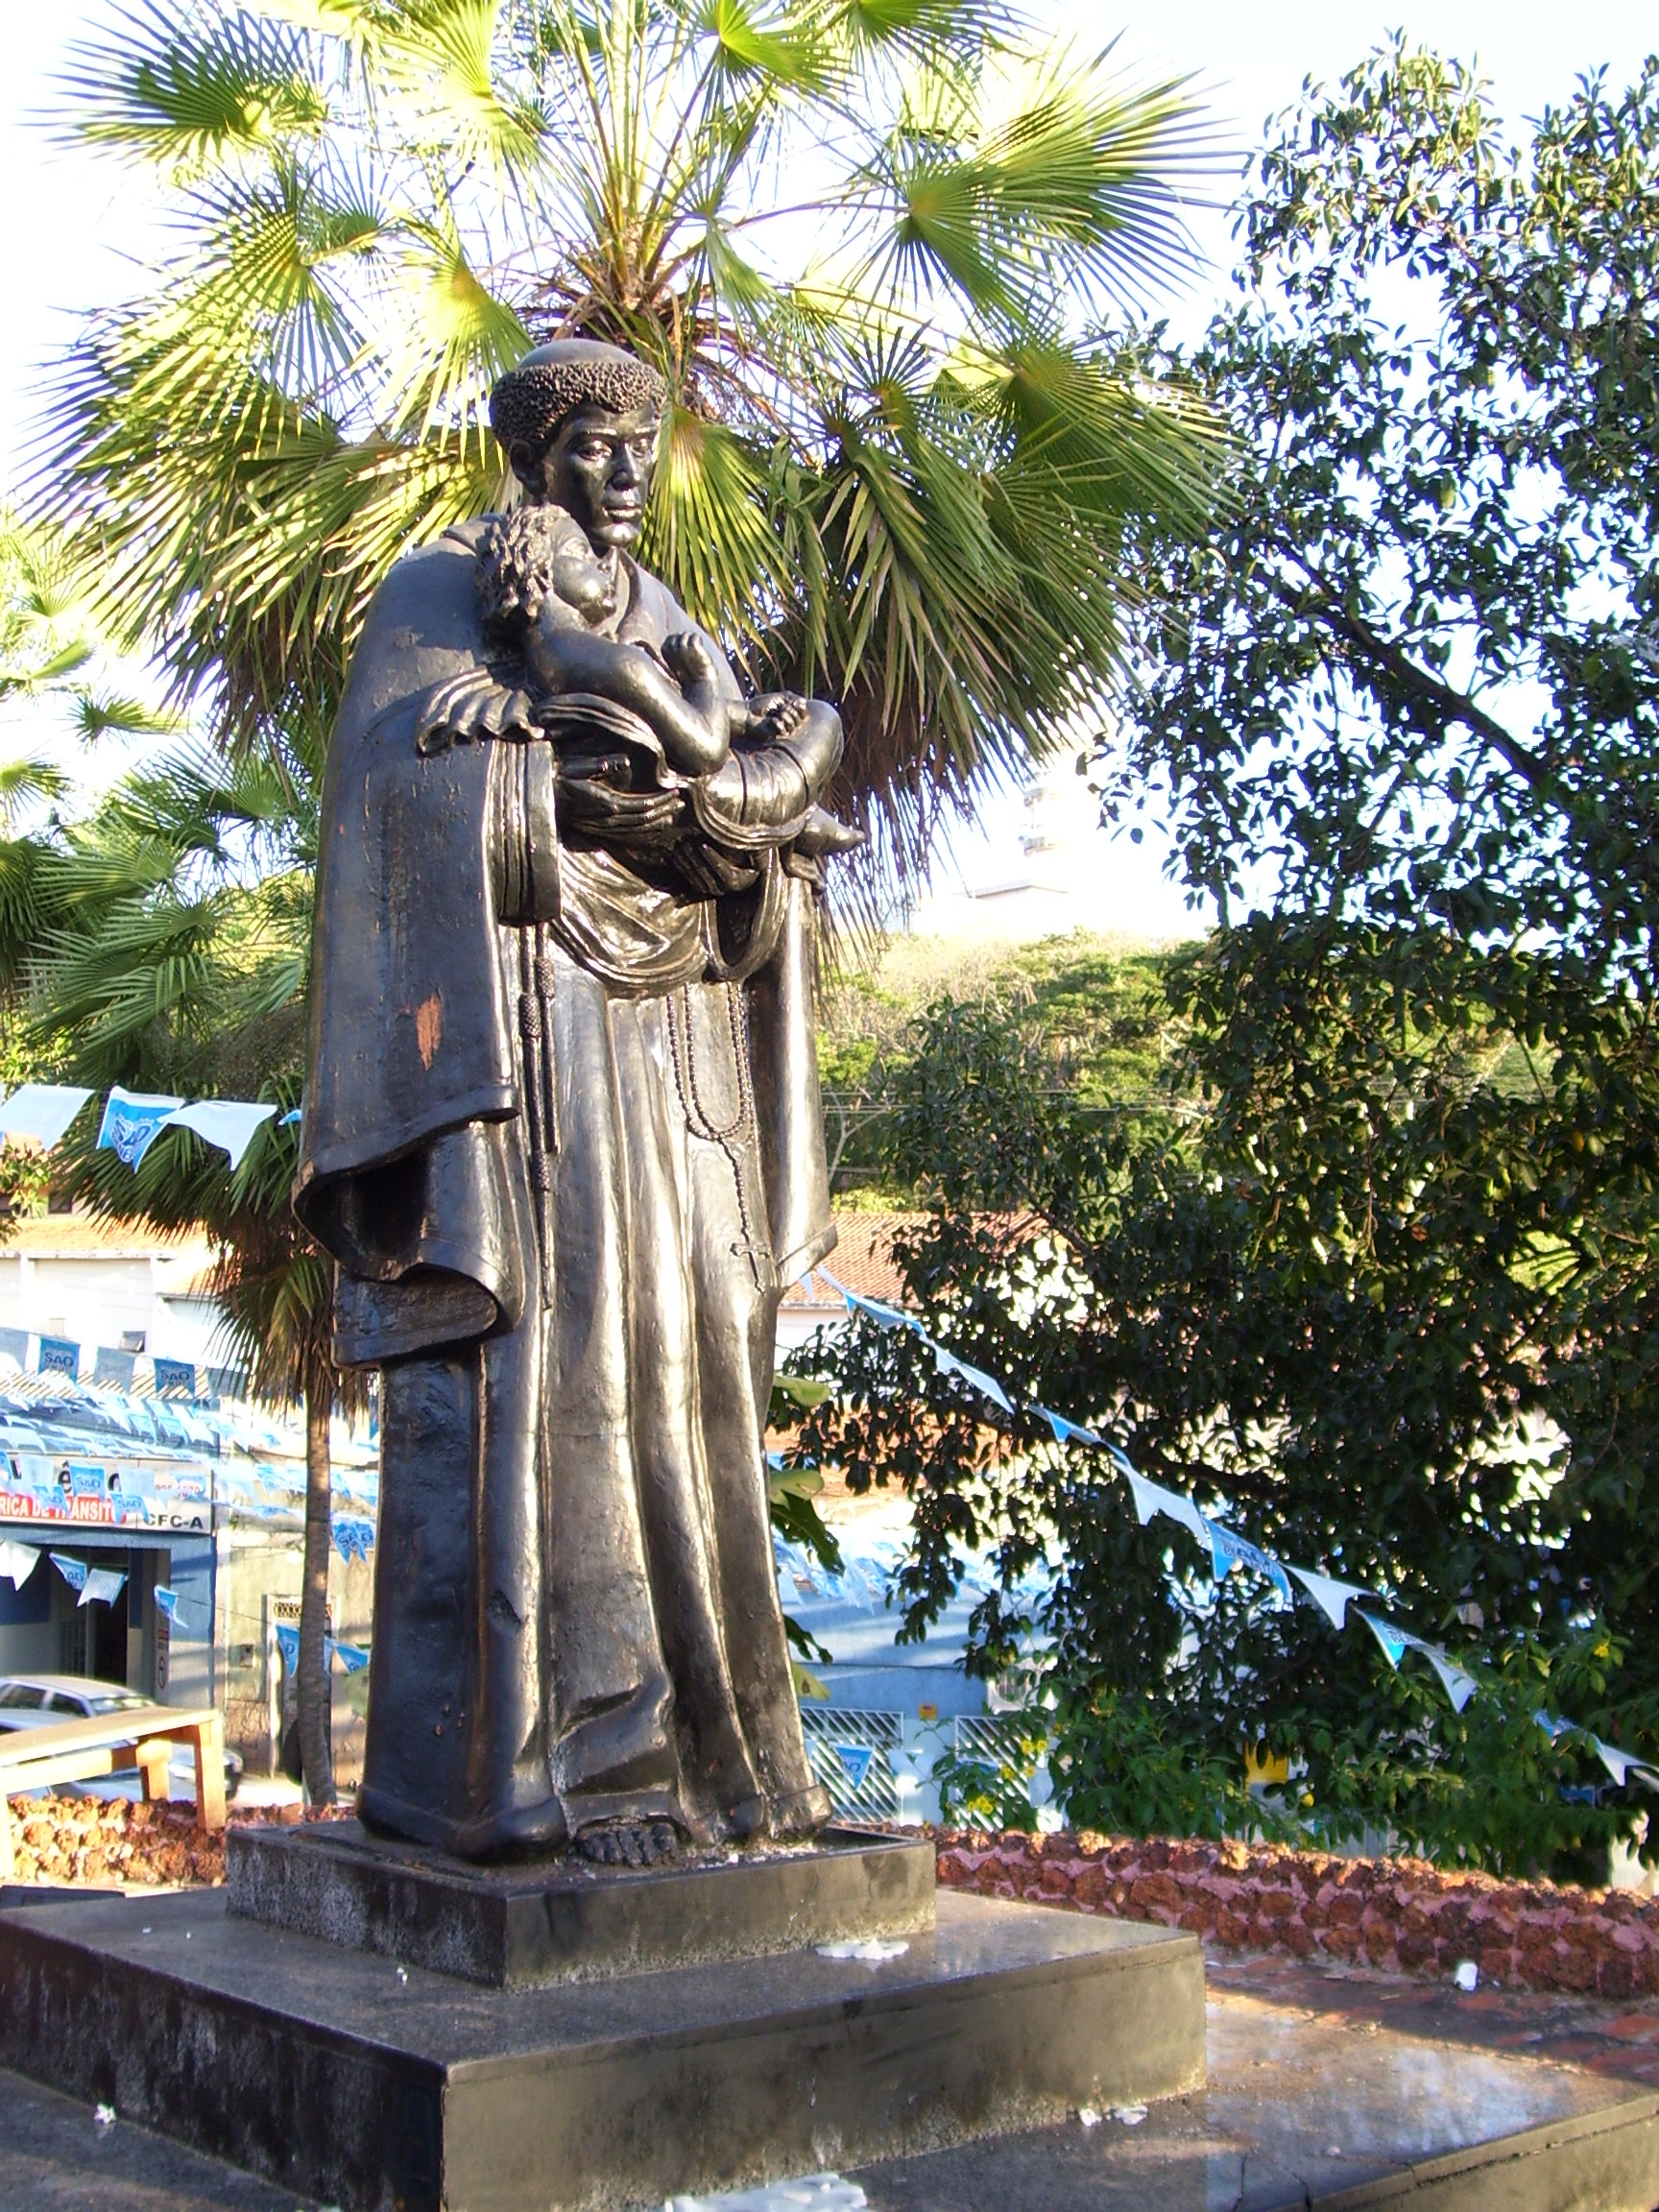  Statue of Saint Benedict the Moor, in the front of the Church of Our Lady of the Rosary and Saint Benedict, Cuiabá, Mato Grosso, Brazil.  [Public domain], via Wikimedia Commons